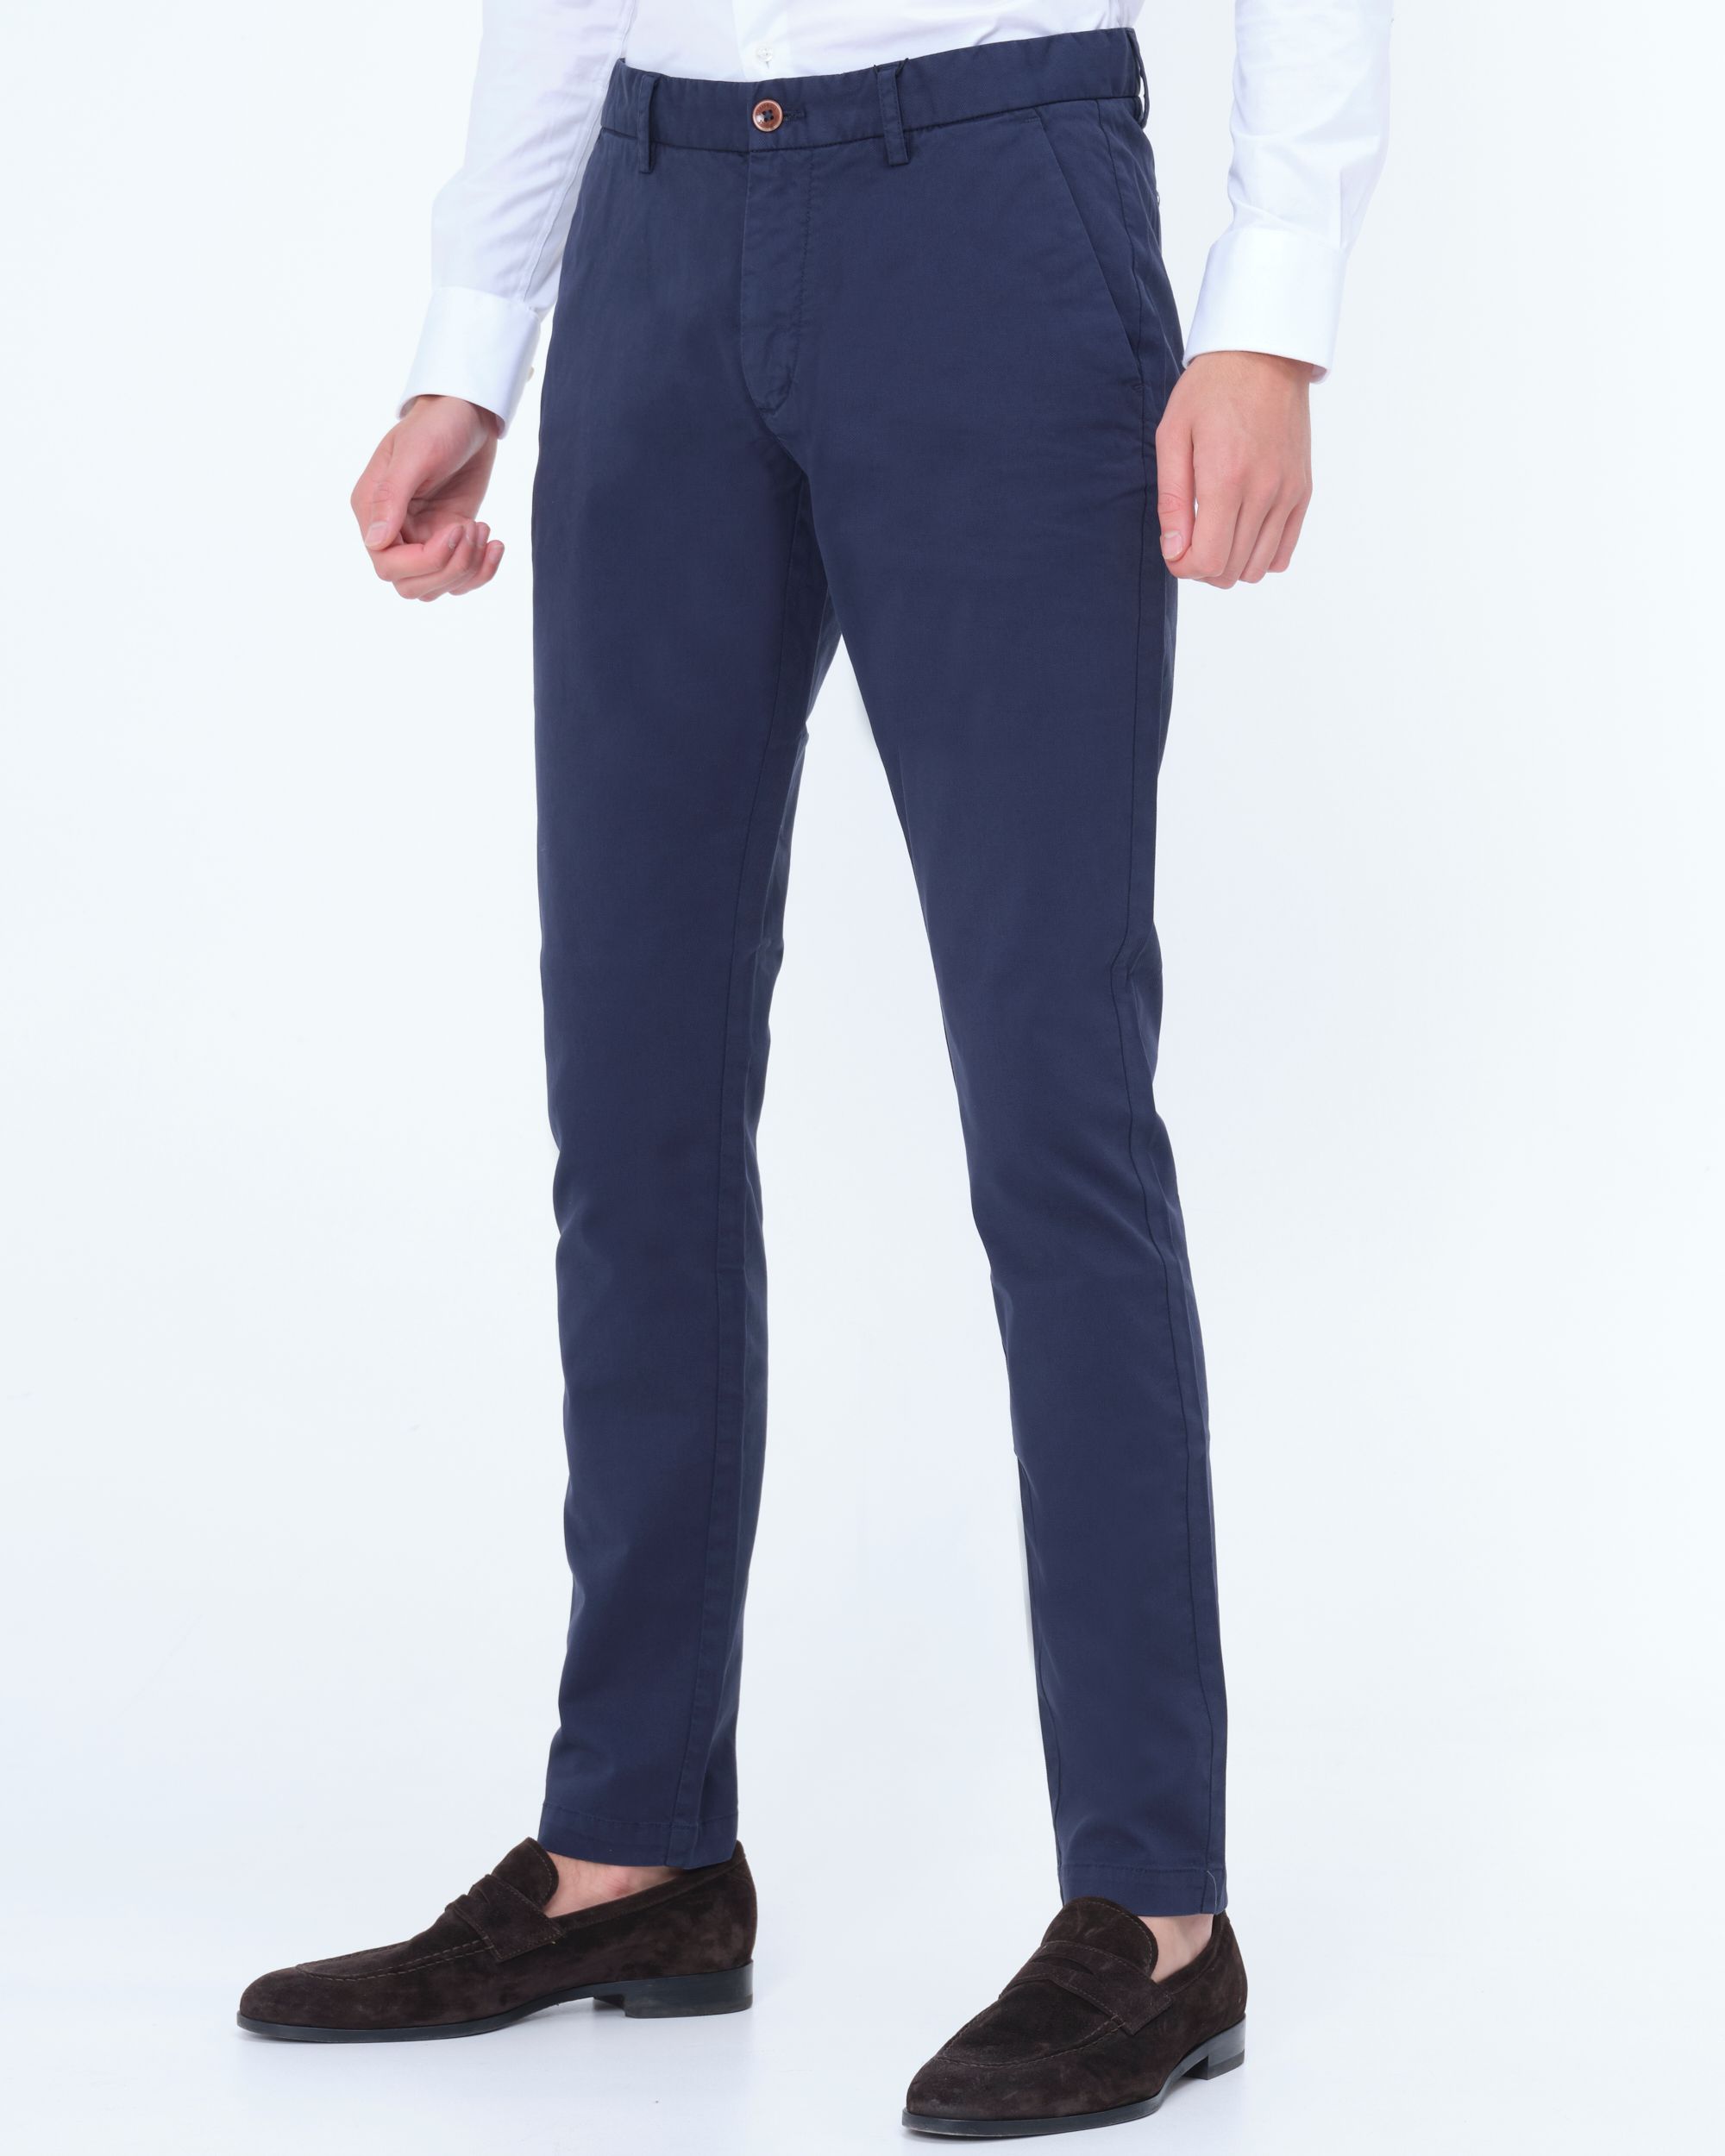 Campbell Classic Chino NAVY 081571-001-30/34